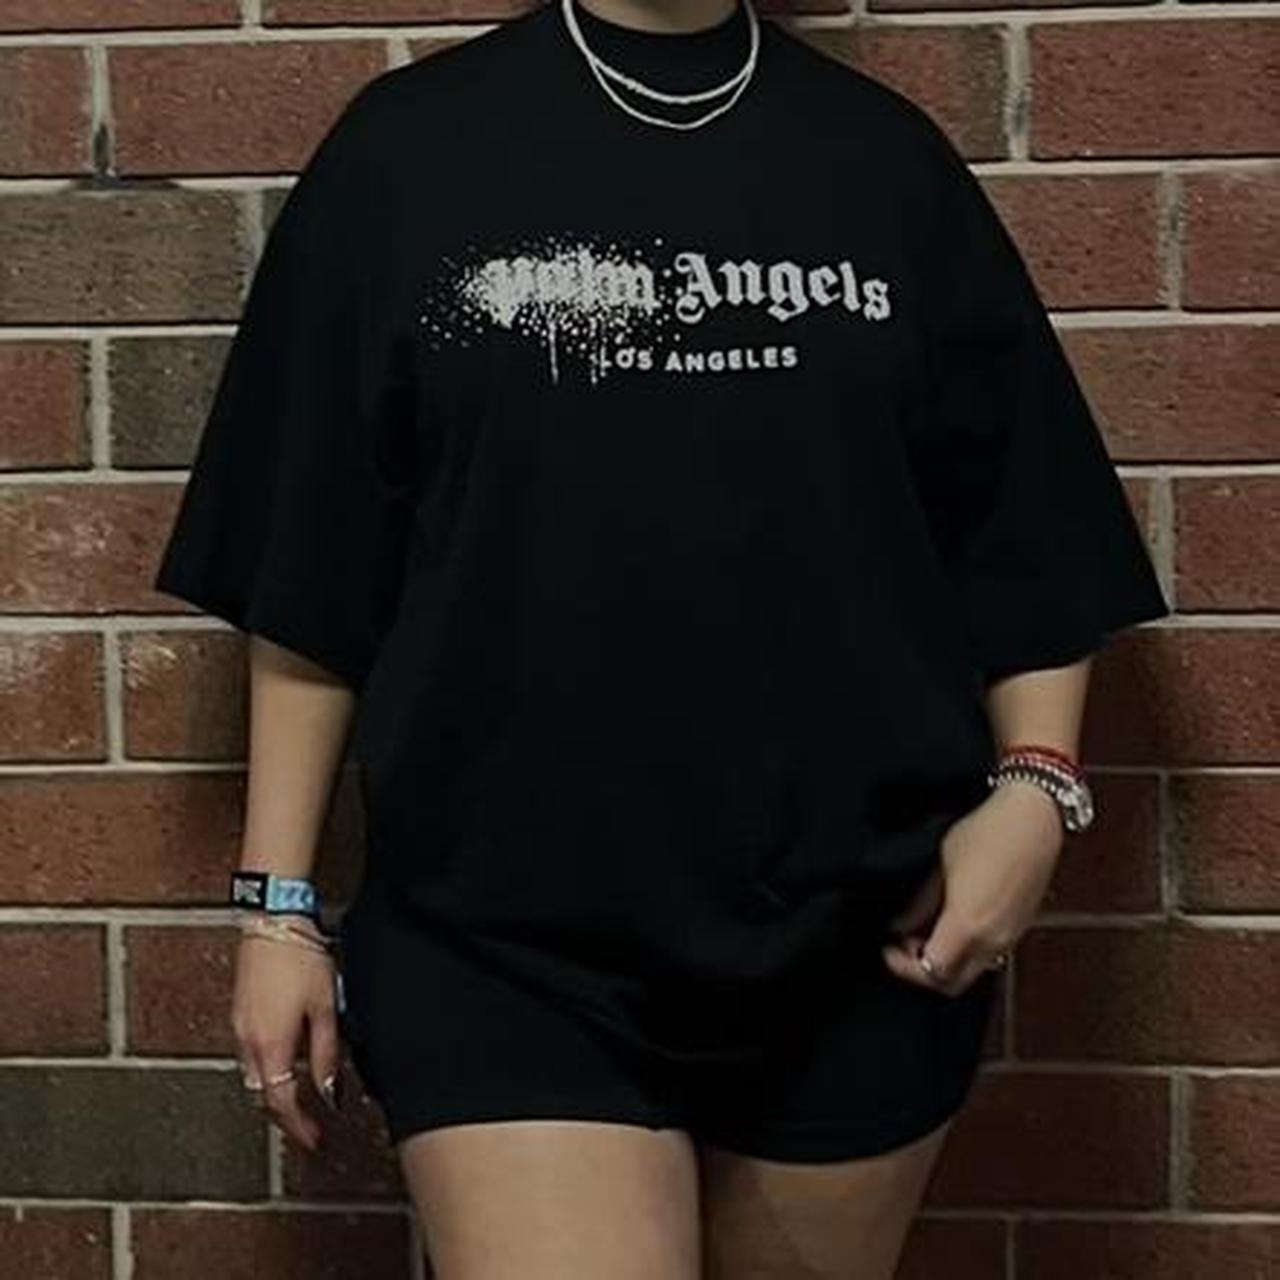 Palm angels shirt, great for street style, fits big - Depop